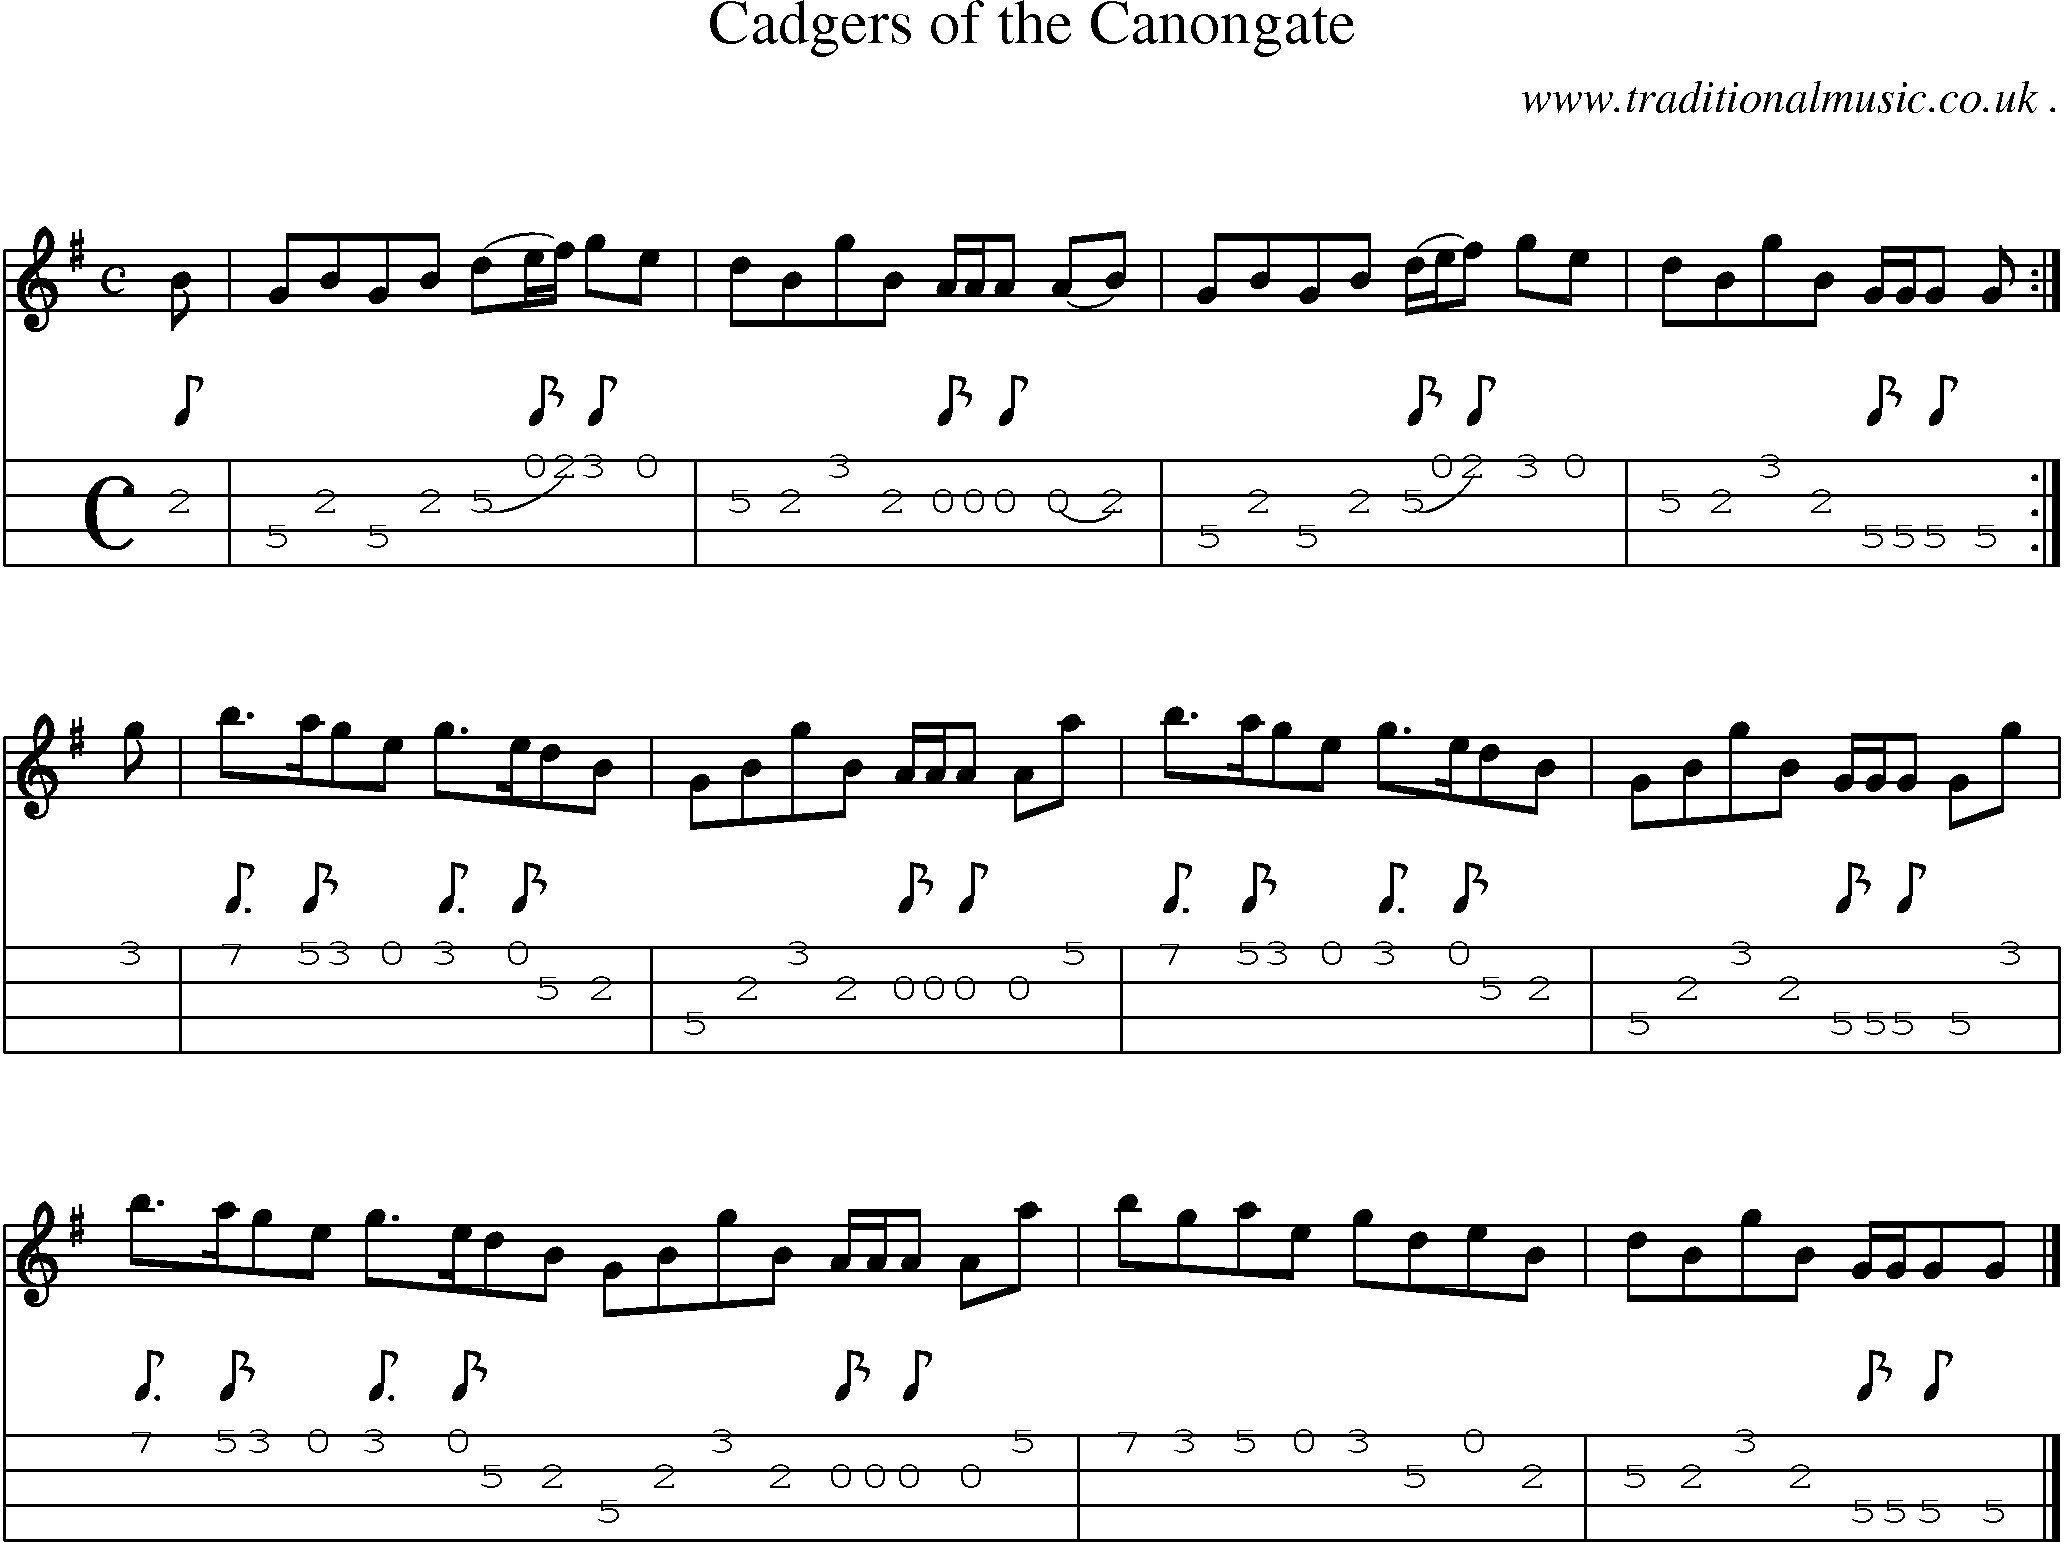 Sheet-music  score, Chords and Mandolin Tabs for Cadgers Of The Canongate